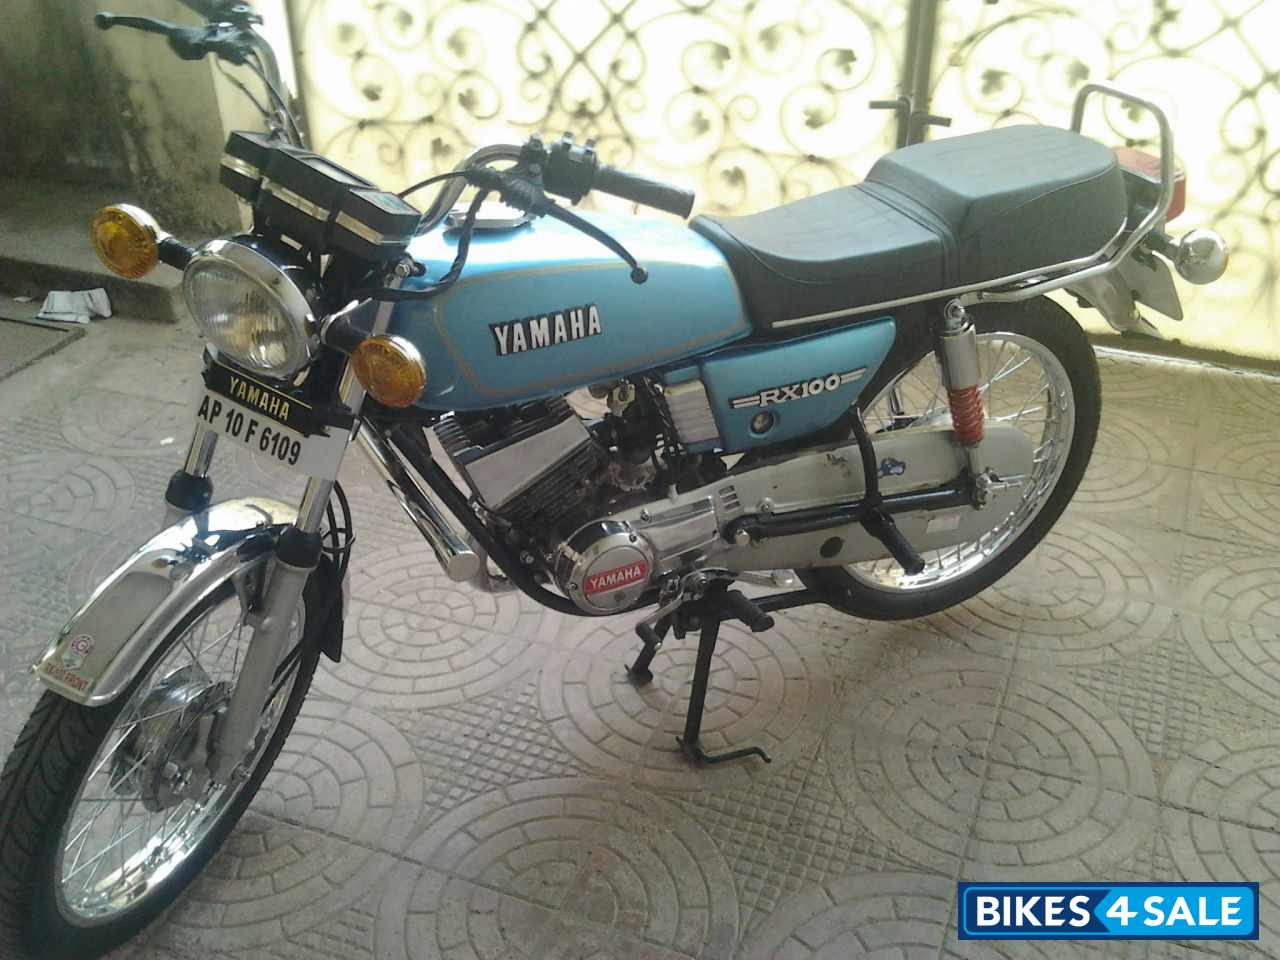 Used 1994 Model Yamaha Rx 100 For Sale In Telangana Id Sky Blue Colour Bikes4sale